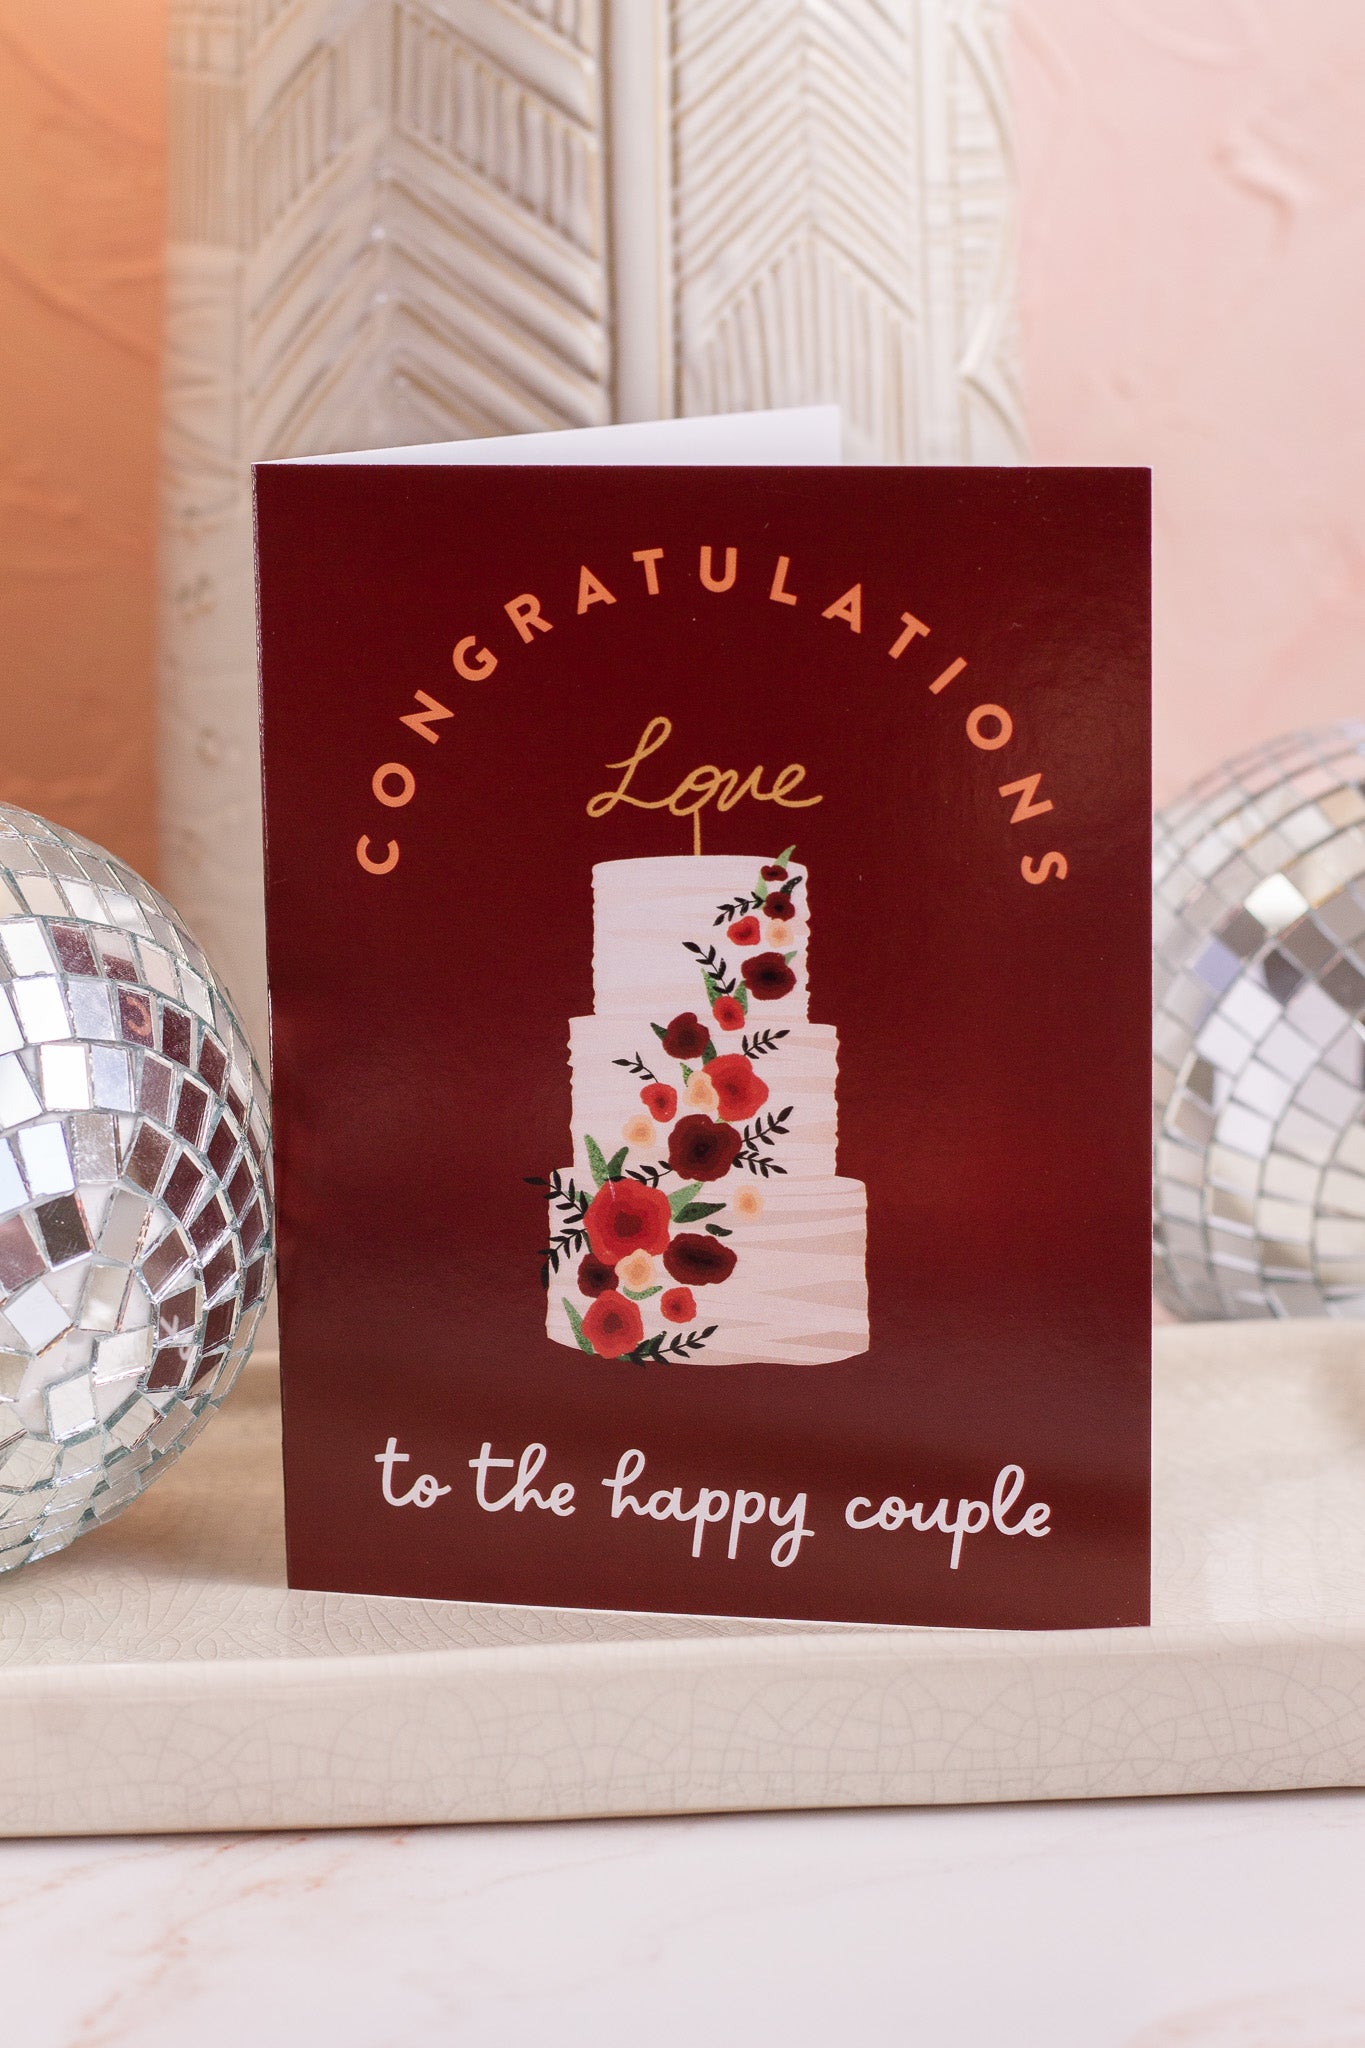 Congratulations to the Happy Couple Card